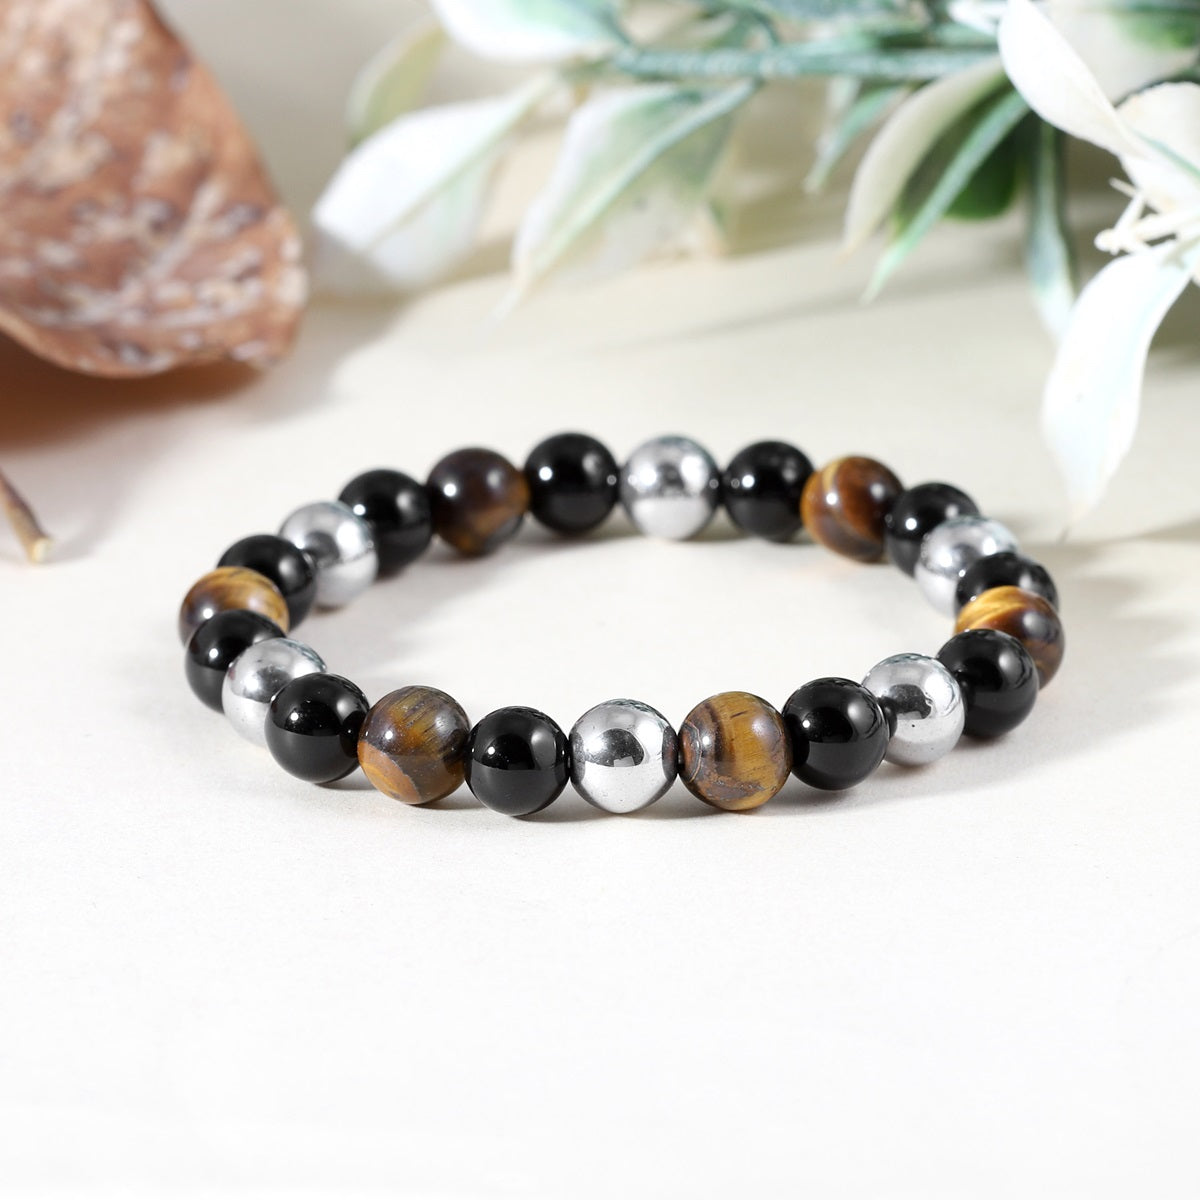 A collection of Triple Protection Stretch Bracelets, each uniquely combining Golden Tiger's Eye, Black Onyx, and Hematite for a trifecta of protective energies